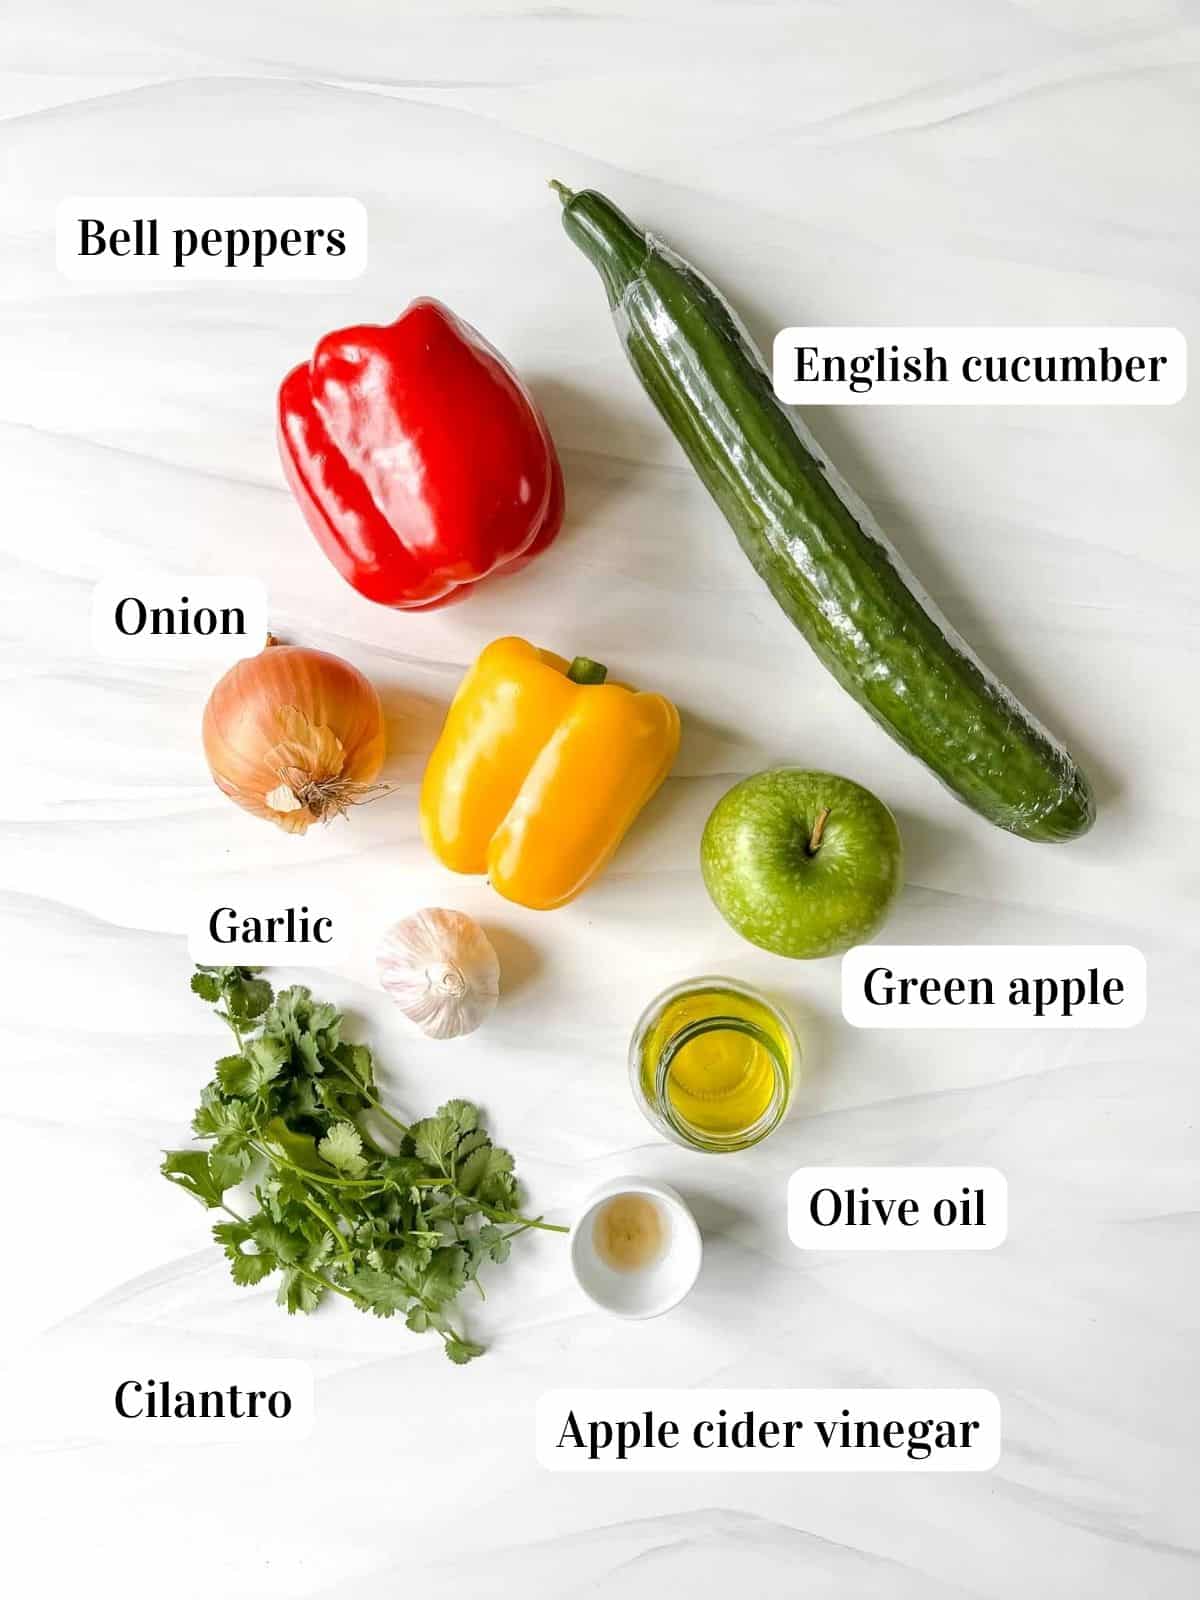 individually labelled ingredients to make bell pepper salsa including cilantro, cucumber, onion and olive oil.